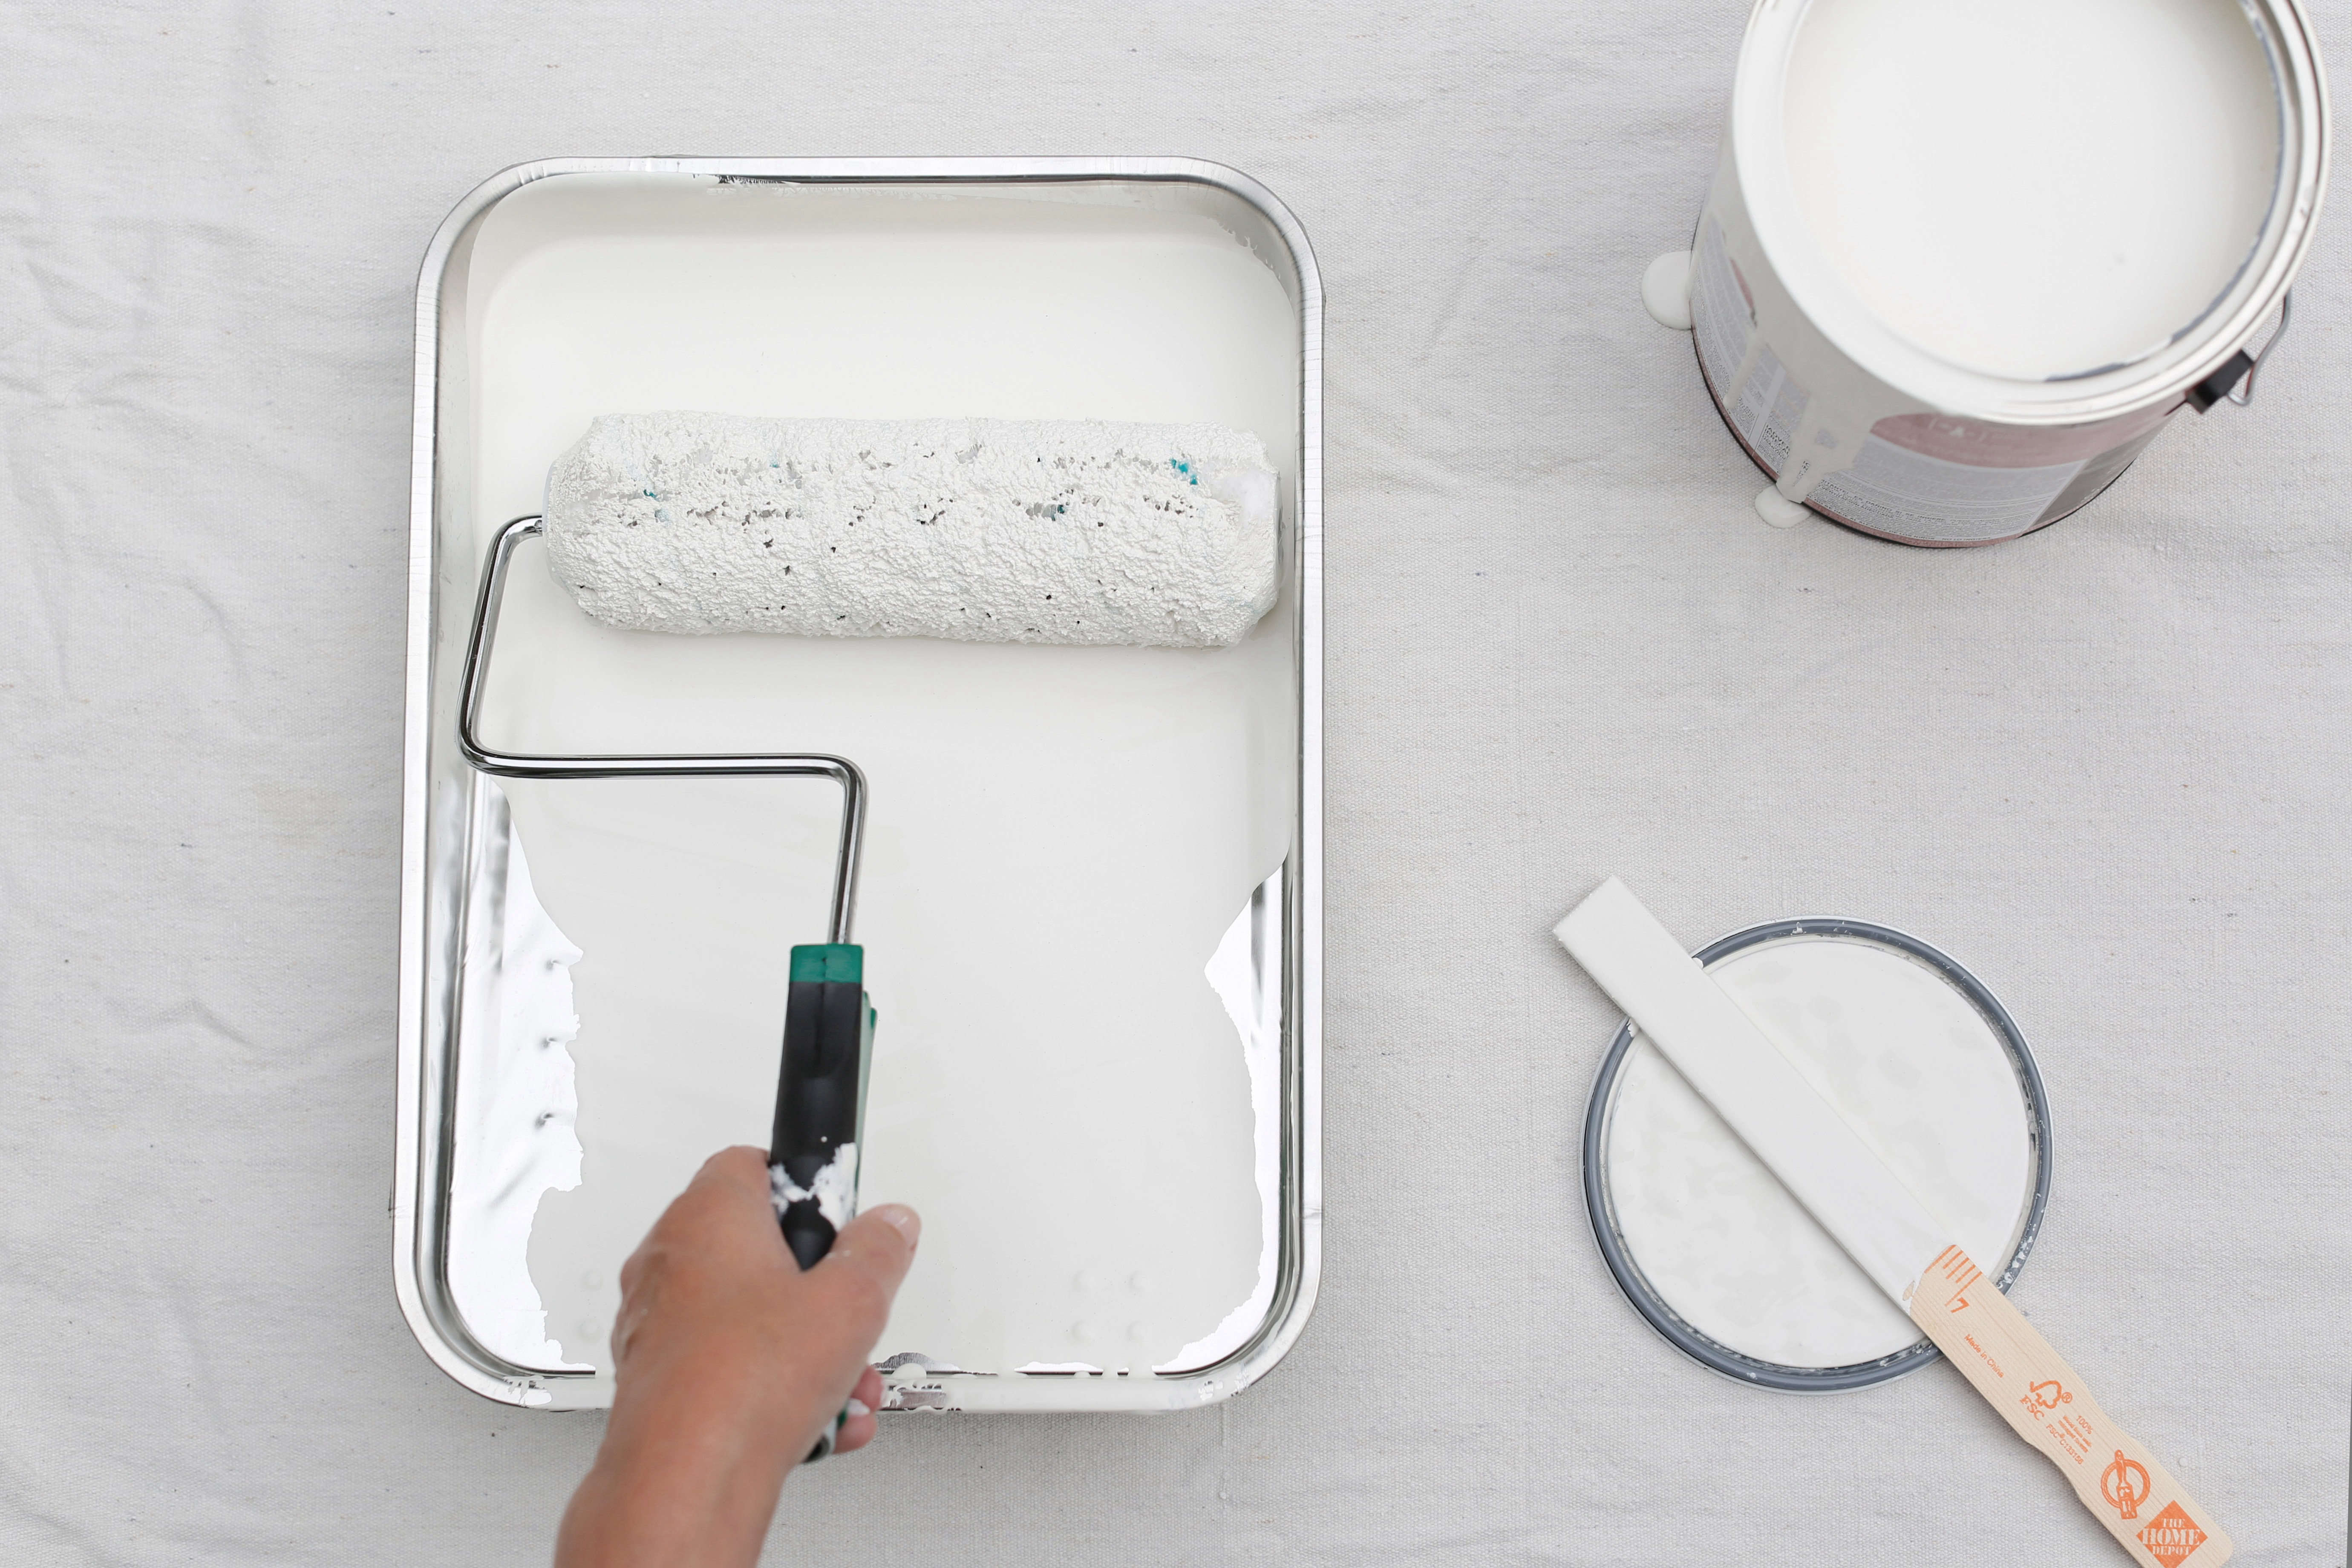 5 Insider Secrets to Using a Paint Roller - Remodelista